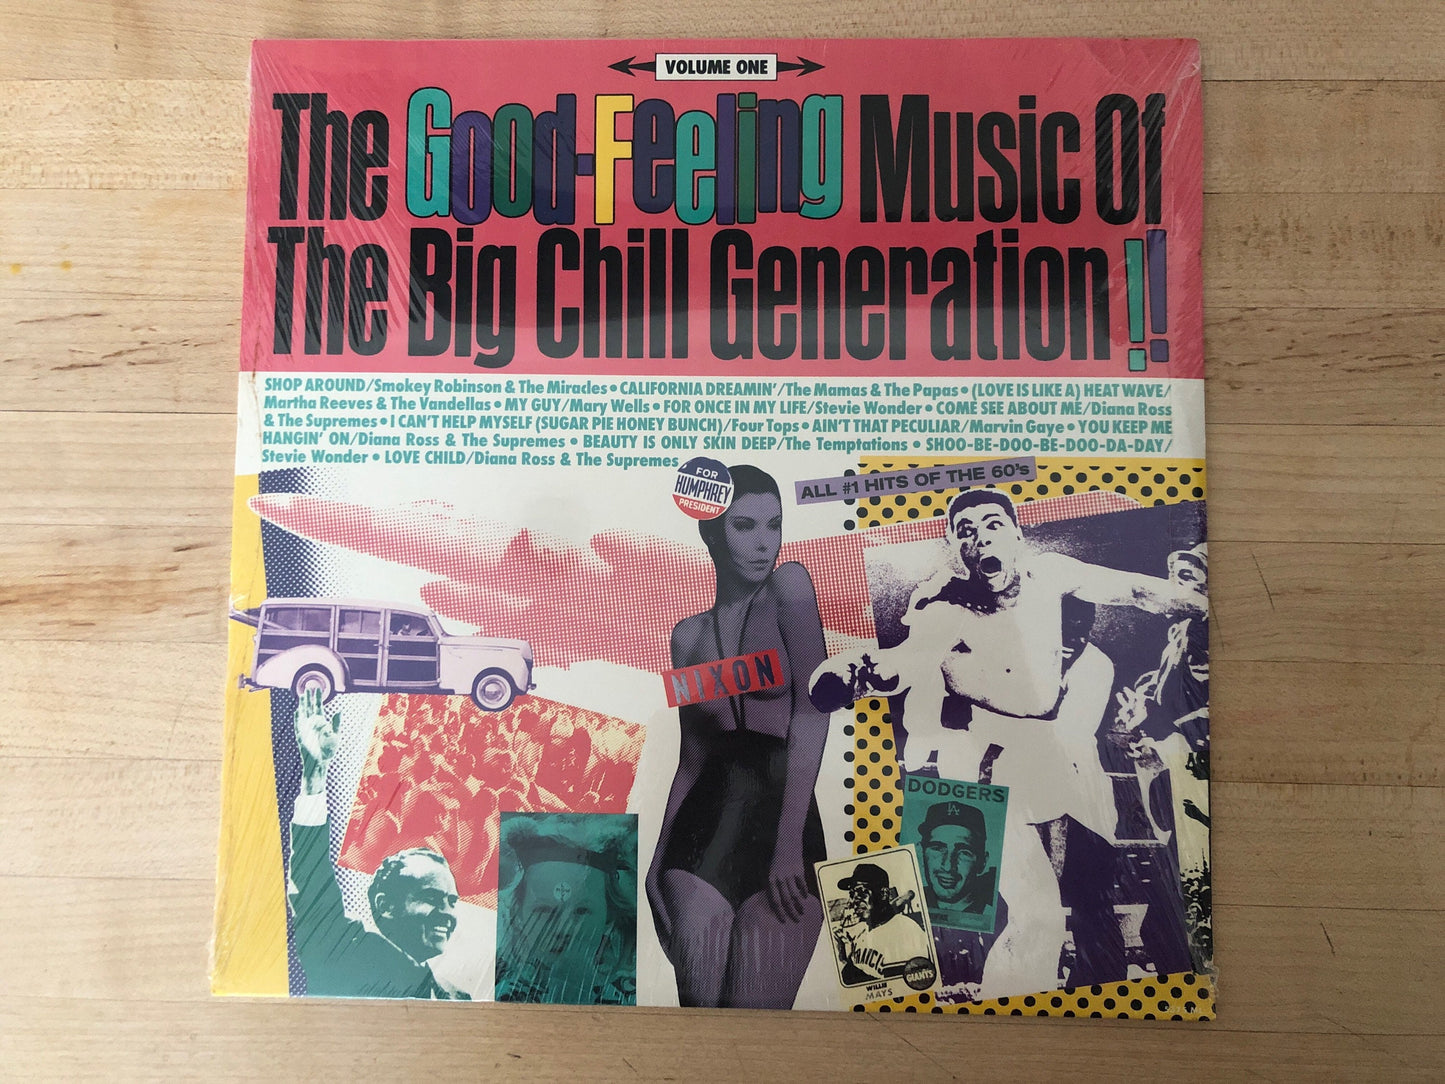 Good Feeling Music of the Big Chill Generation • Volumes 1 and 2 •  1985 Doo Wop Records • Vinyl LP Record • Vintage Vinyl •  Motown Records